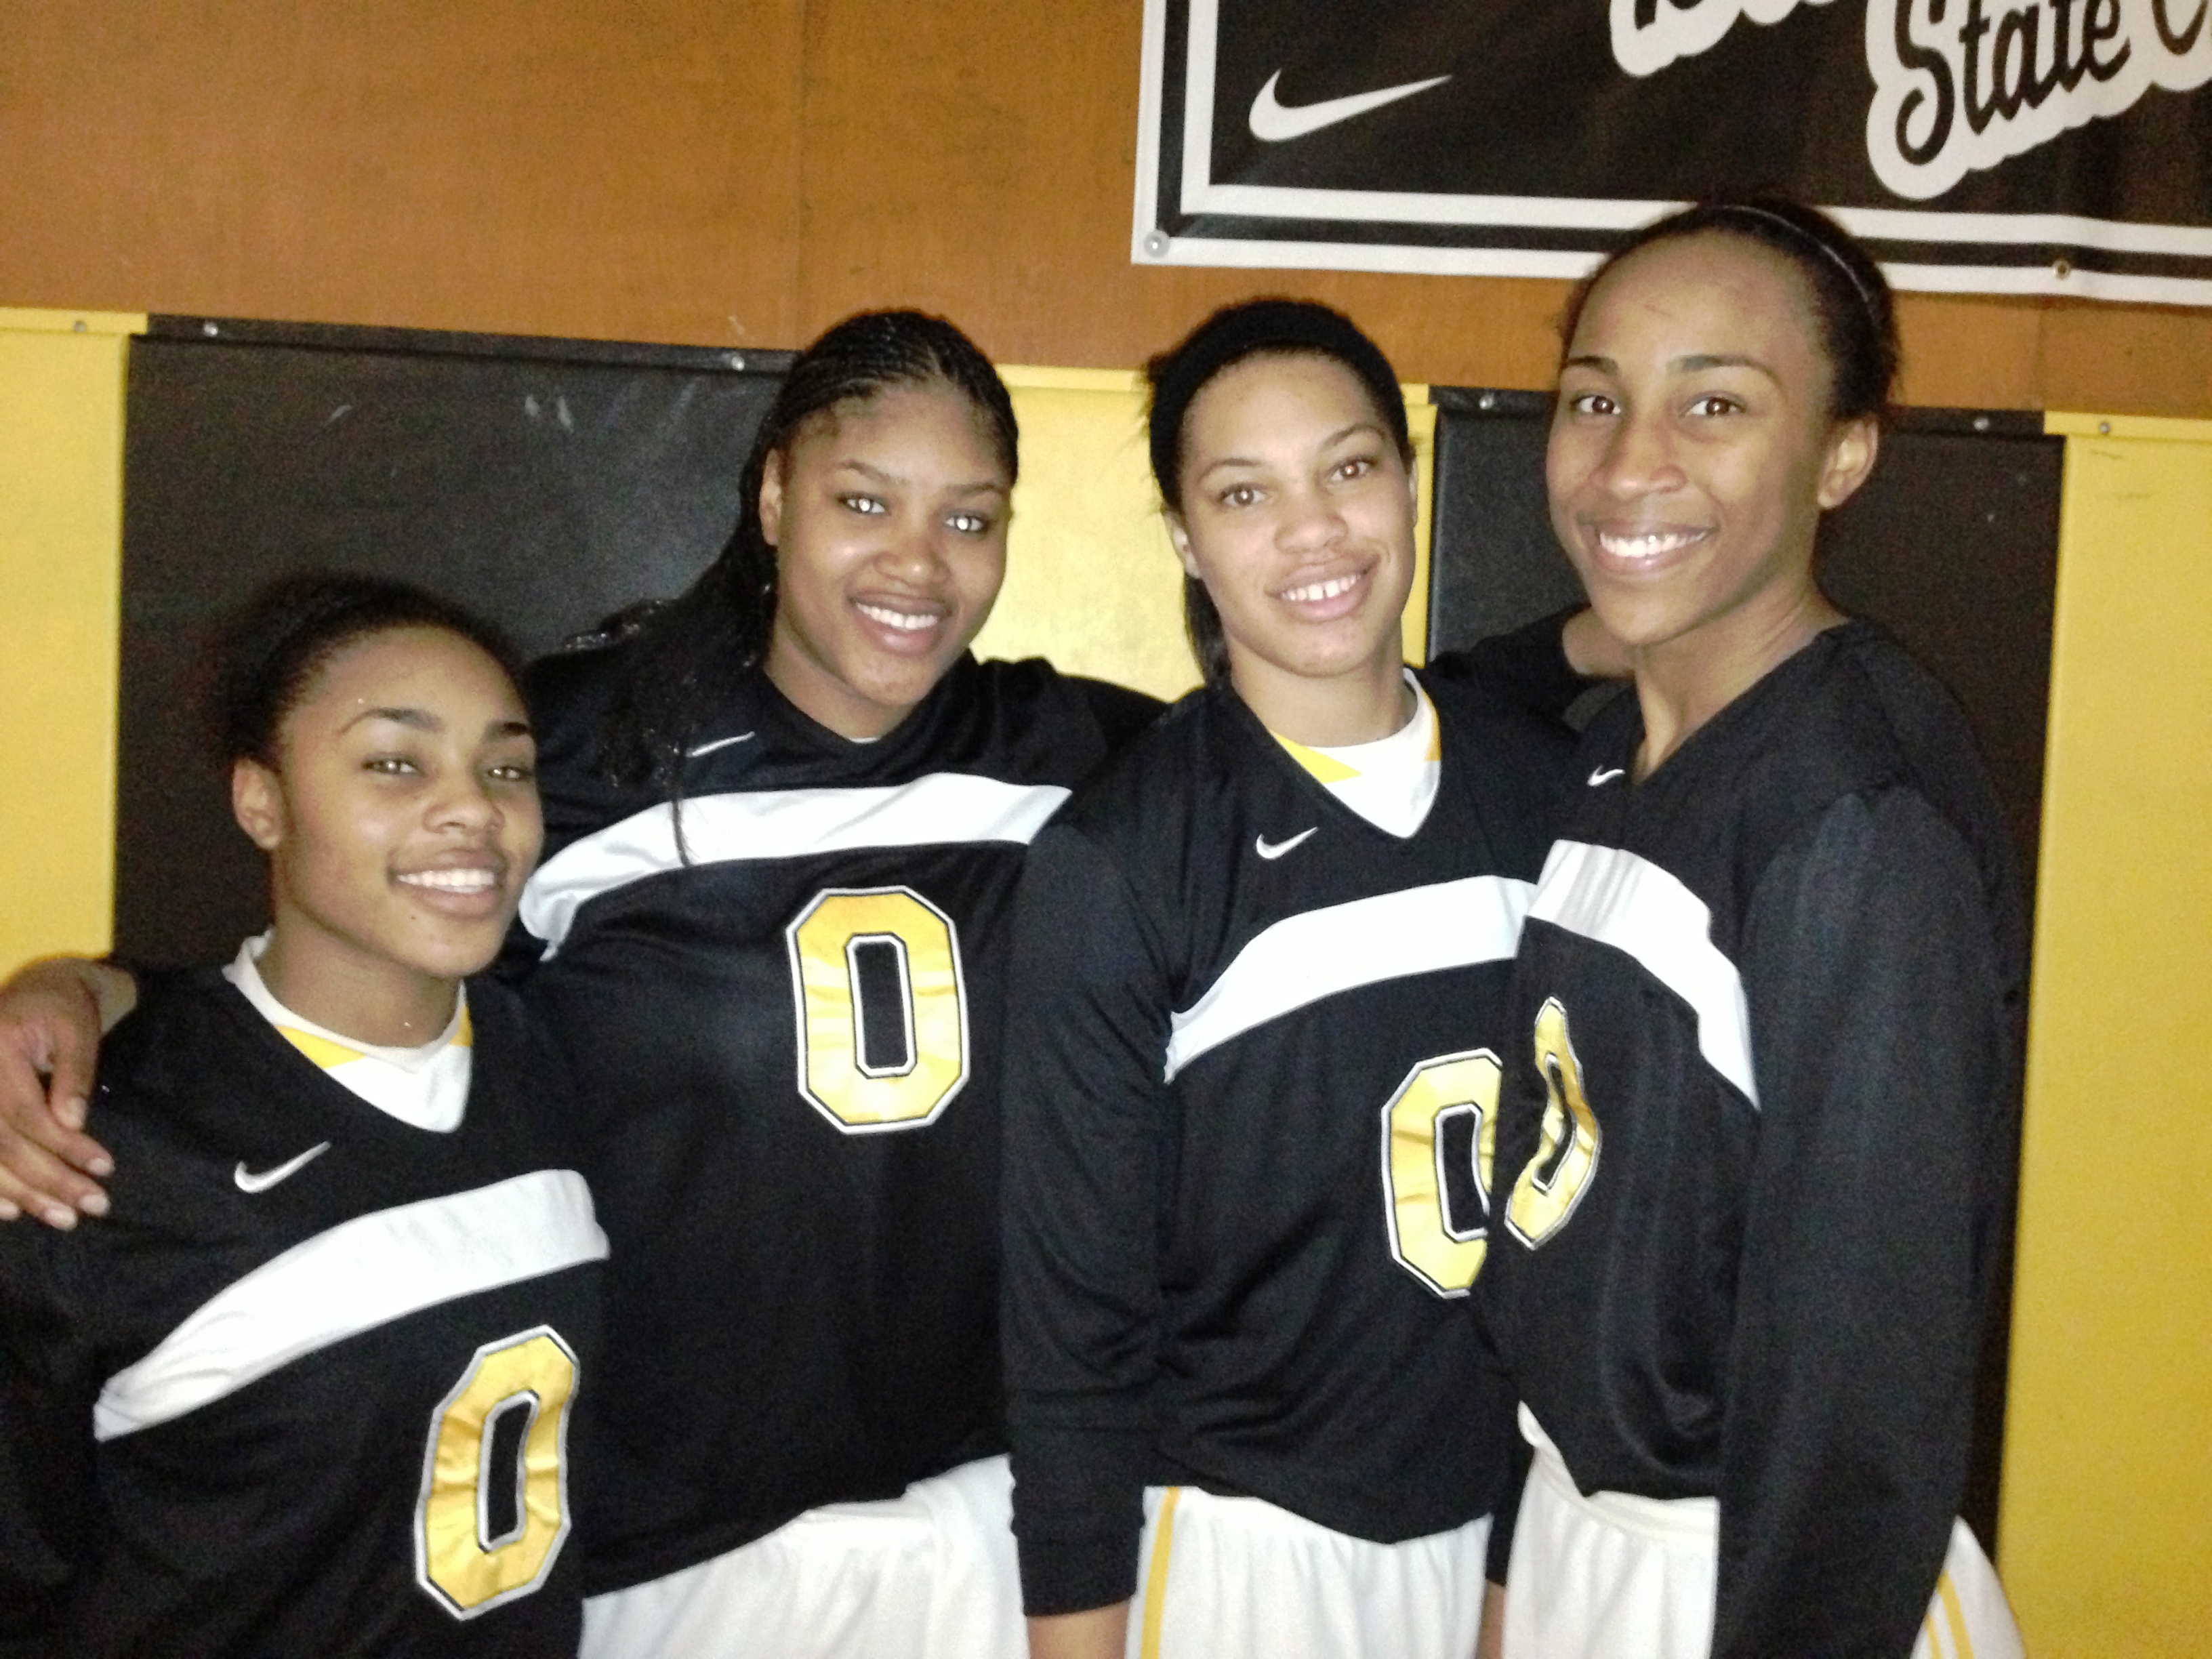 All four of Bishop O'Dowd's college-bound standouts -- Ariel Bostick, K.C. Waters, Breanna Brown and Oderah Chidom -- played well in team's victory last Saturday against St. Mary's of Stockton. Photo: Harold Abend.